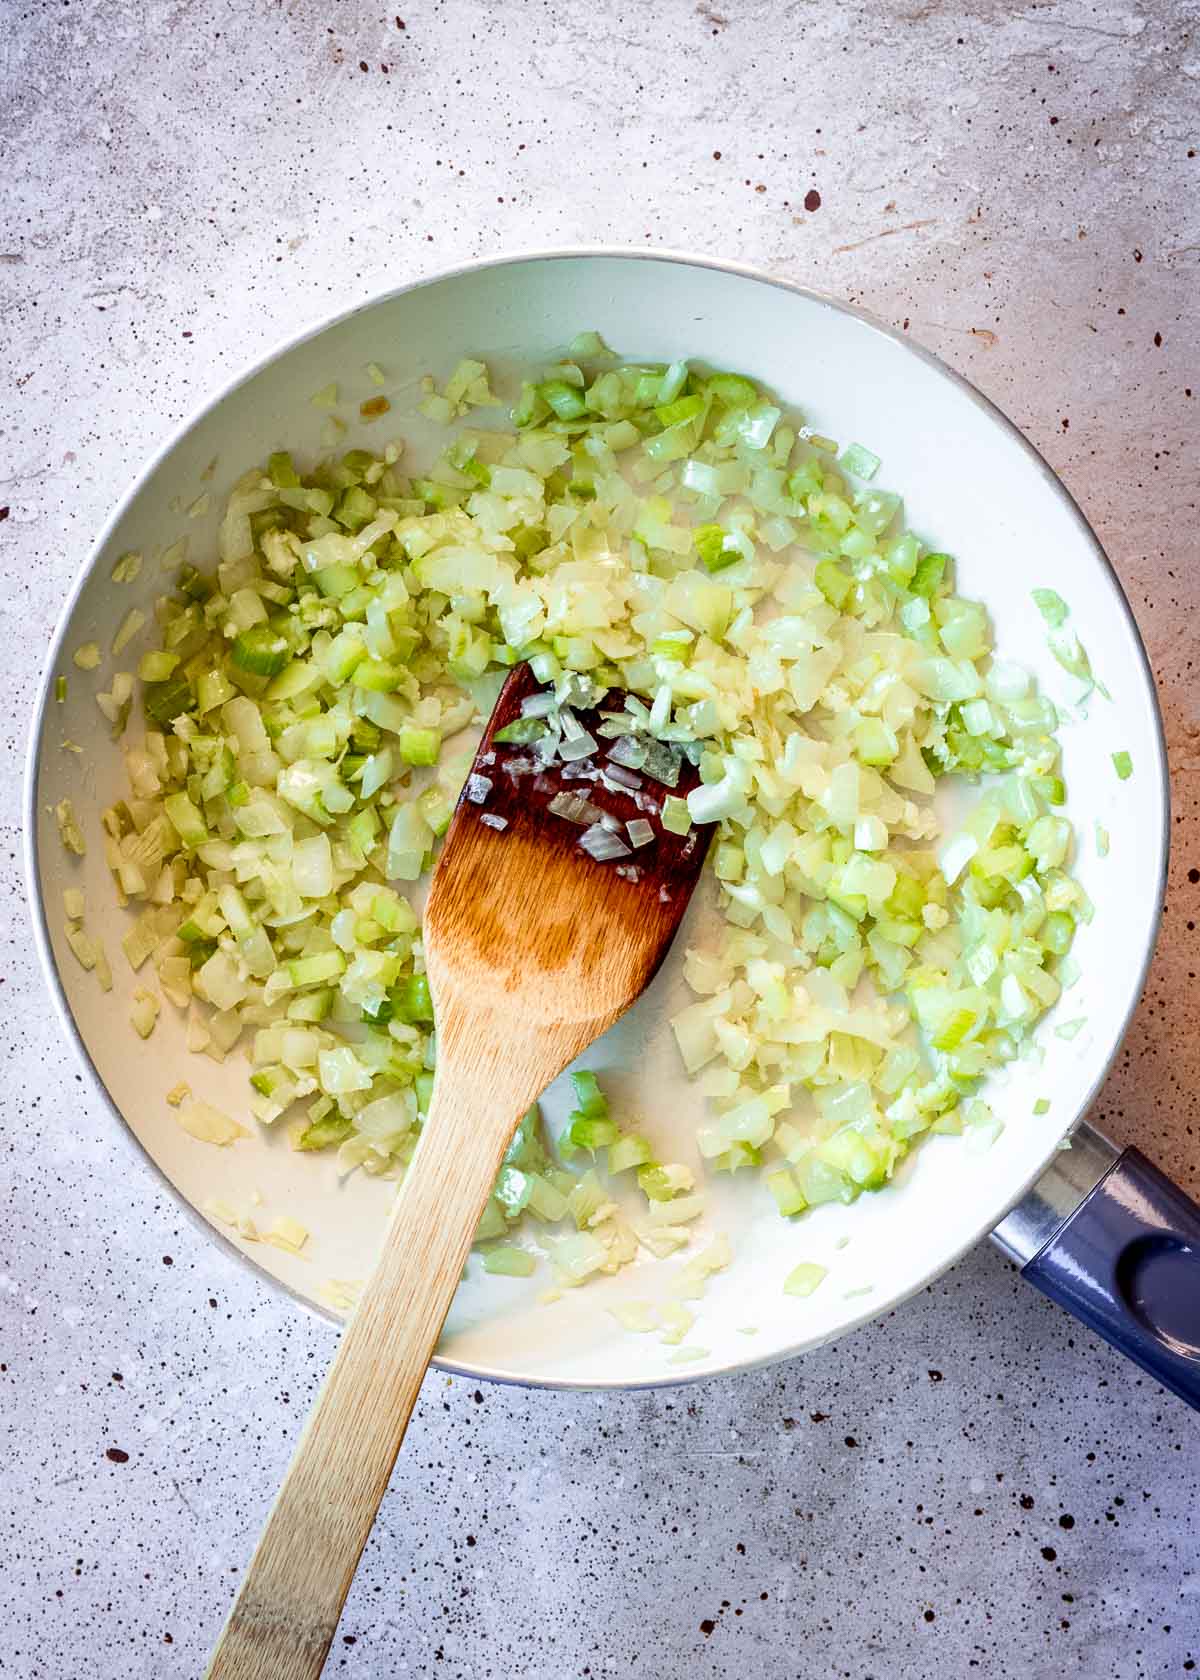 Celery, onion and garlic being sauteed in large white pan with wooden spatula.